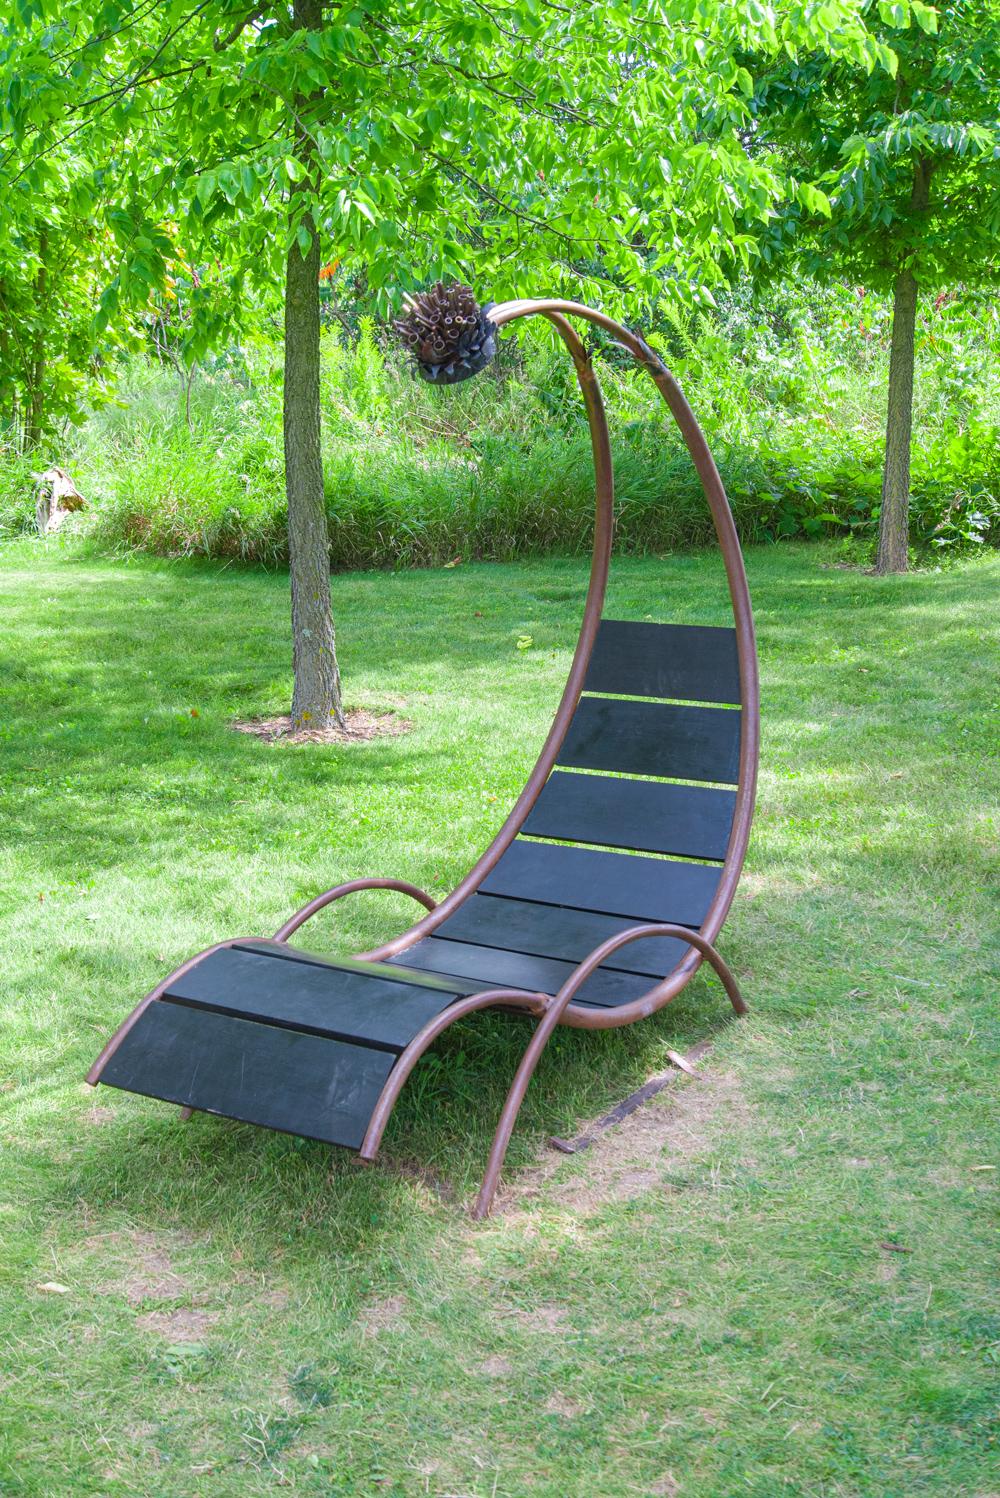 Confession - interactive, abstracted furniture, wood and steel outdoor sculpture - Sculpture by Natsuki Takauji